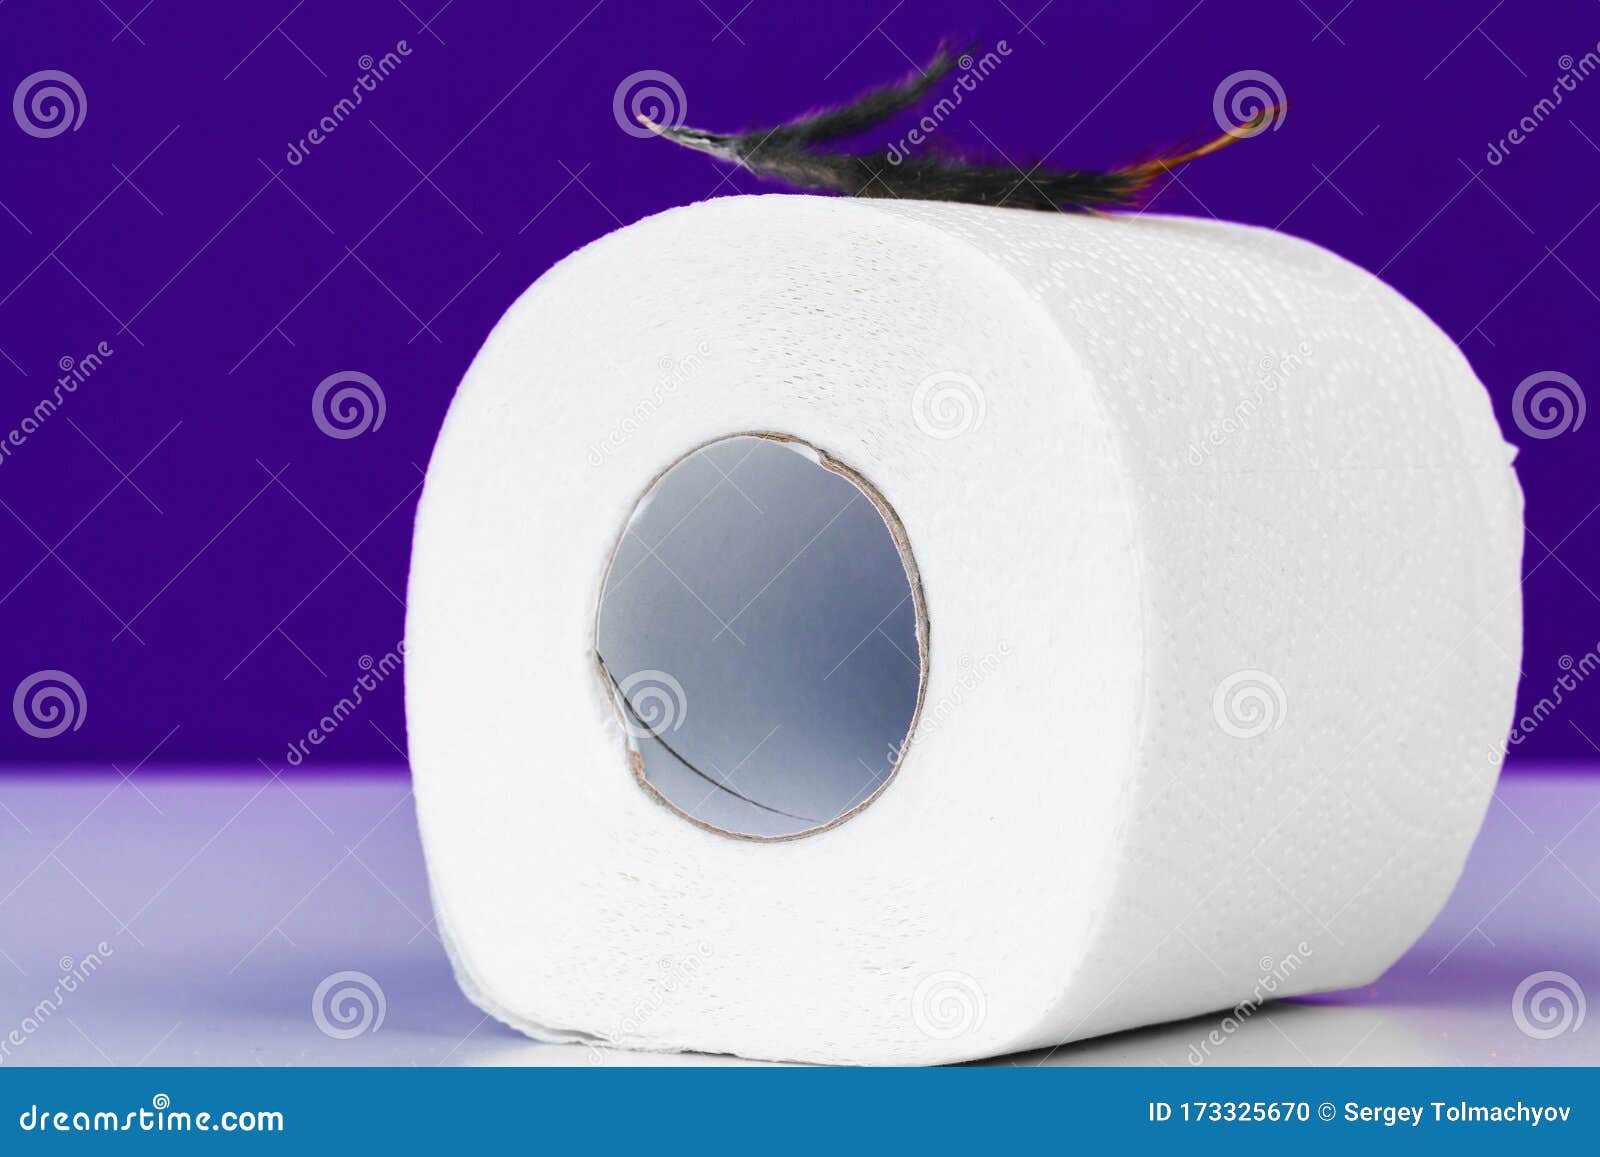 Roll Of Toilet Paper And Soft Feather On Color Table Creative Photo